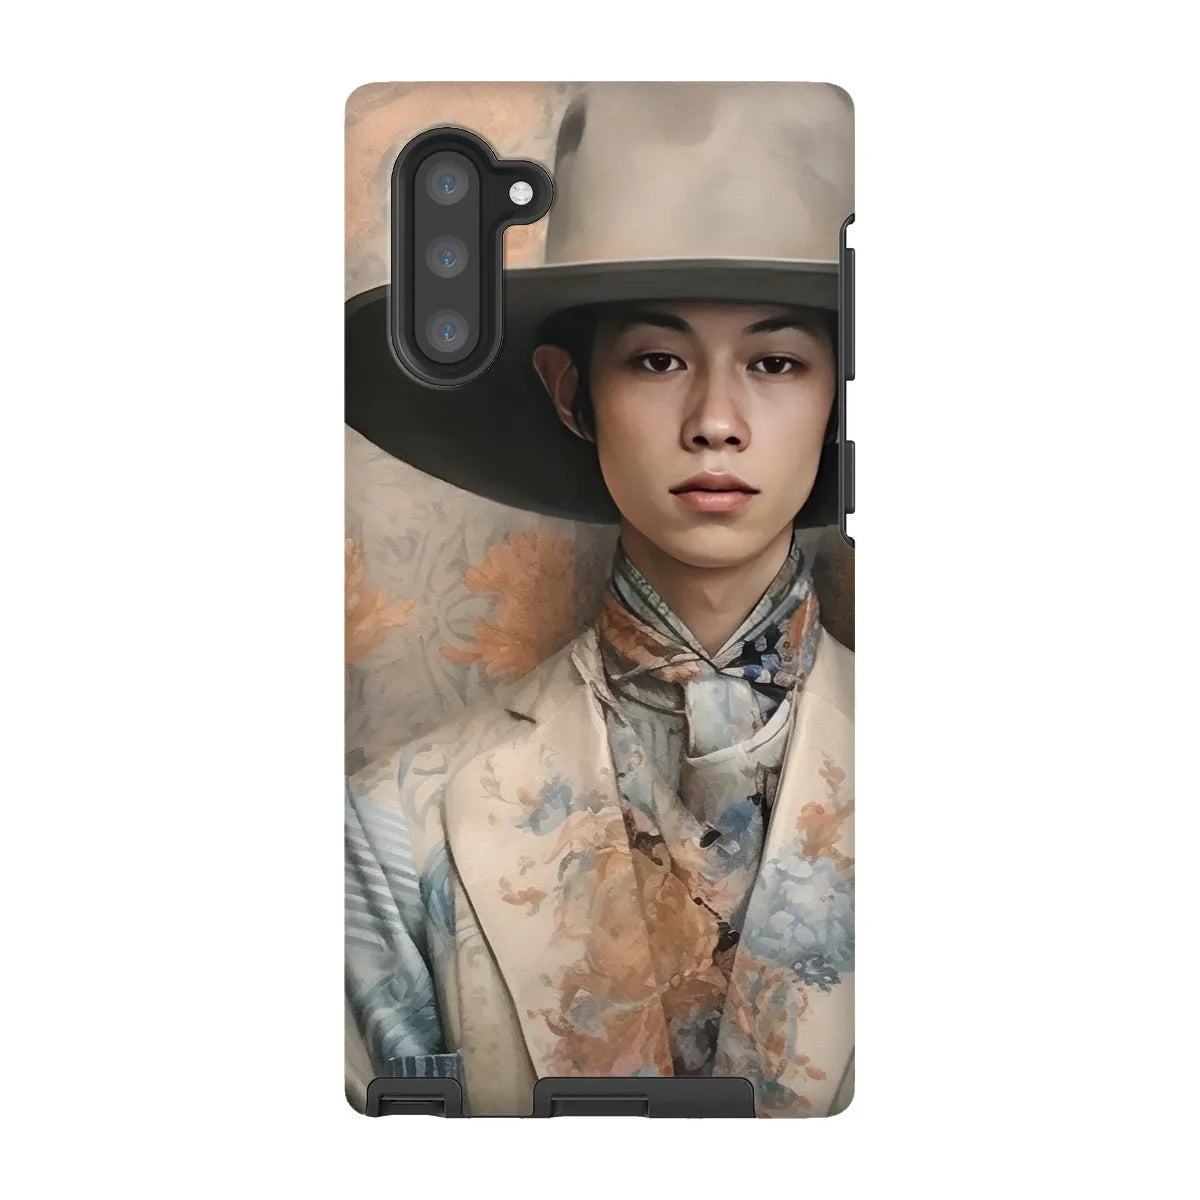 Thuanthong The Transgender Cowboy - Thai F2m Art Phone Case - Samsung Galaxy Note 10 / Matte - Mobile Phone Cases